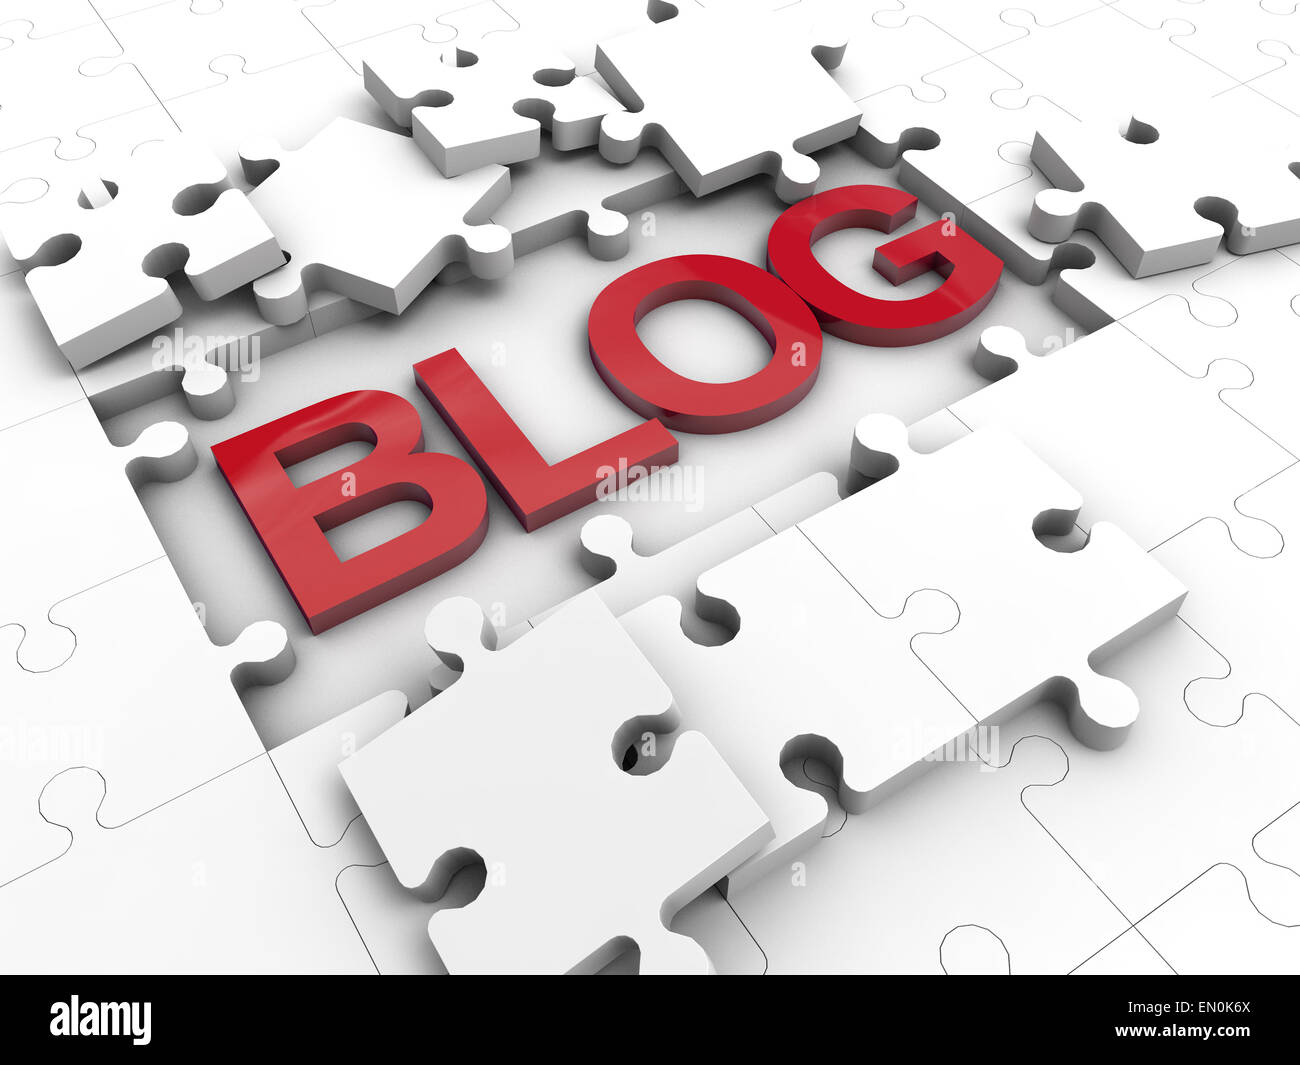 Blog with Puzzle tiles over white background Stock Photo